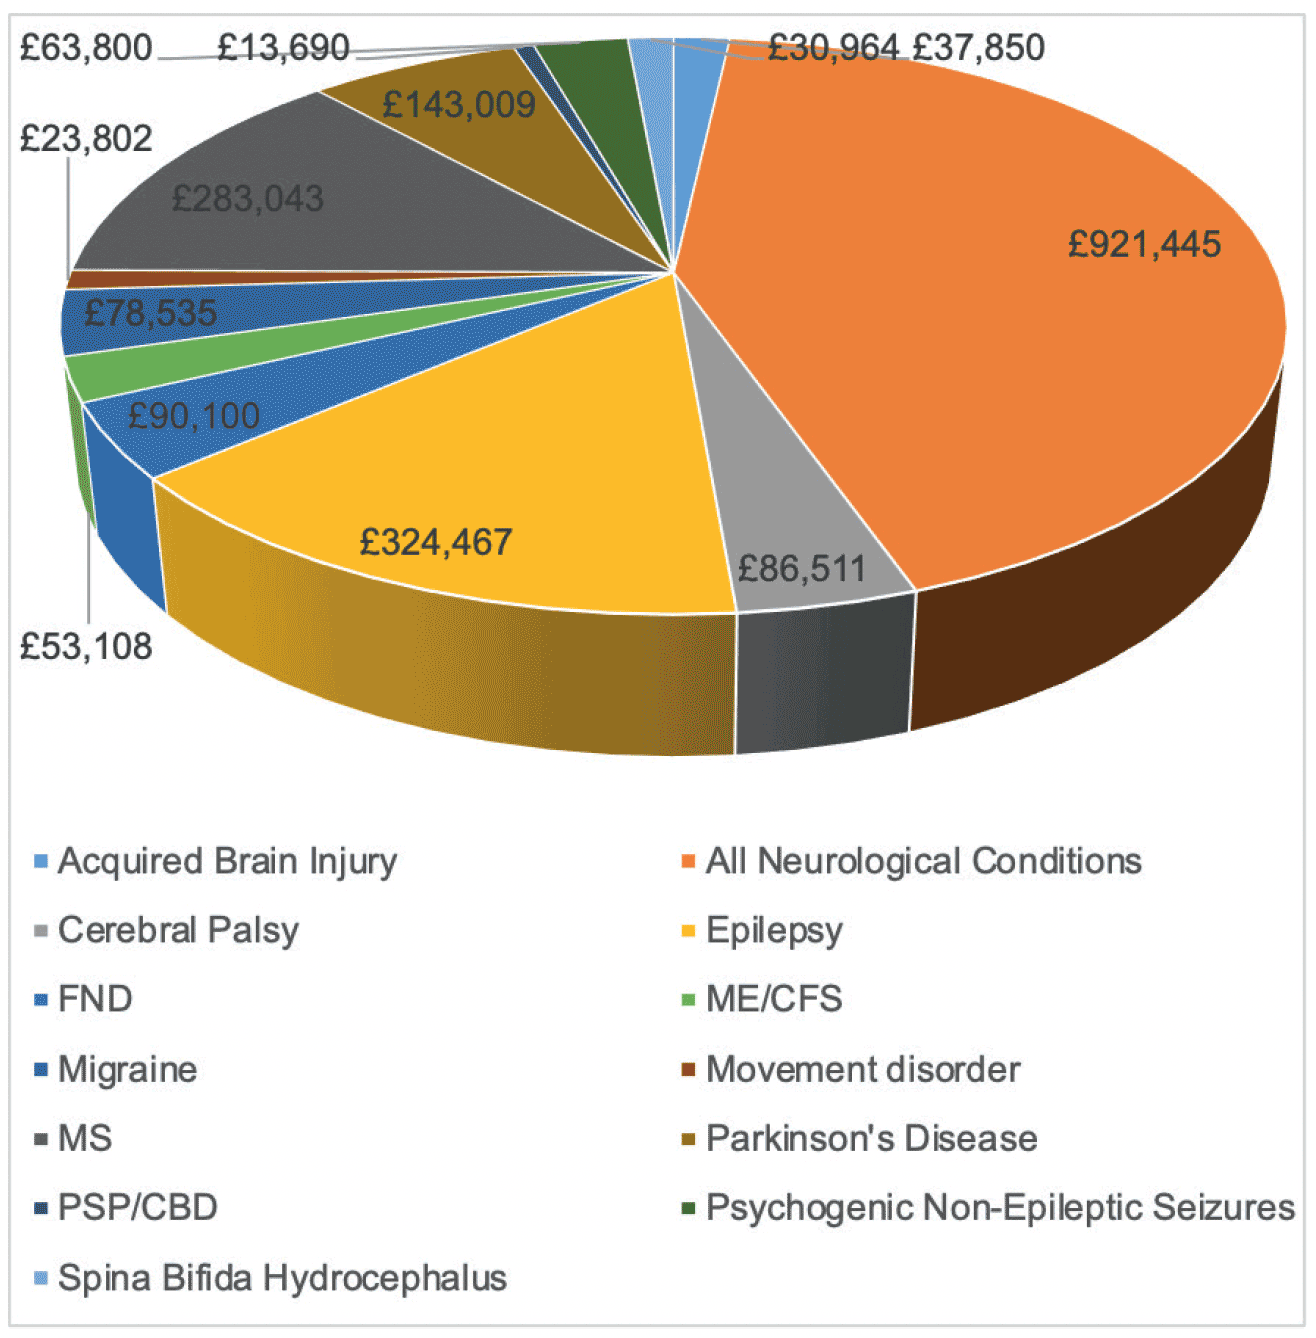 A pie chart showing the framework funding by neurological condition from September 2020 to June 2022. The chart shows funding, by condition, as follows: acquired brain injury - £37,850, cerebral palsy – £86,511, FND - £90,100, migraine - £78,535, MS - £283,243, PSP/CBD - £13,690, spina bifida - £30,964, all neurological conditions - £921,445, epilepsy - £324,467, ME/CFS - £53,108 , movement disorders - £23,802, Parkinson’s disease - £143,009 and psychogenic non-epileptic seizures - £63,800.